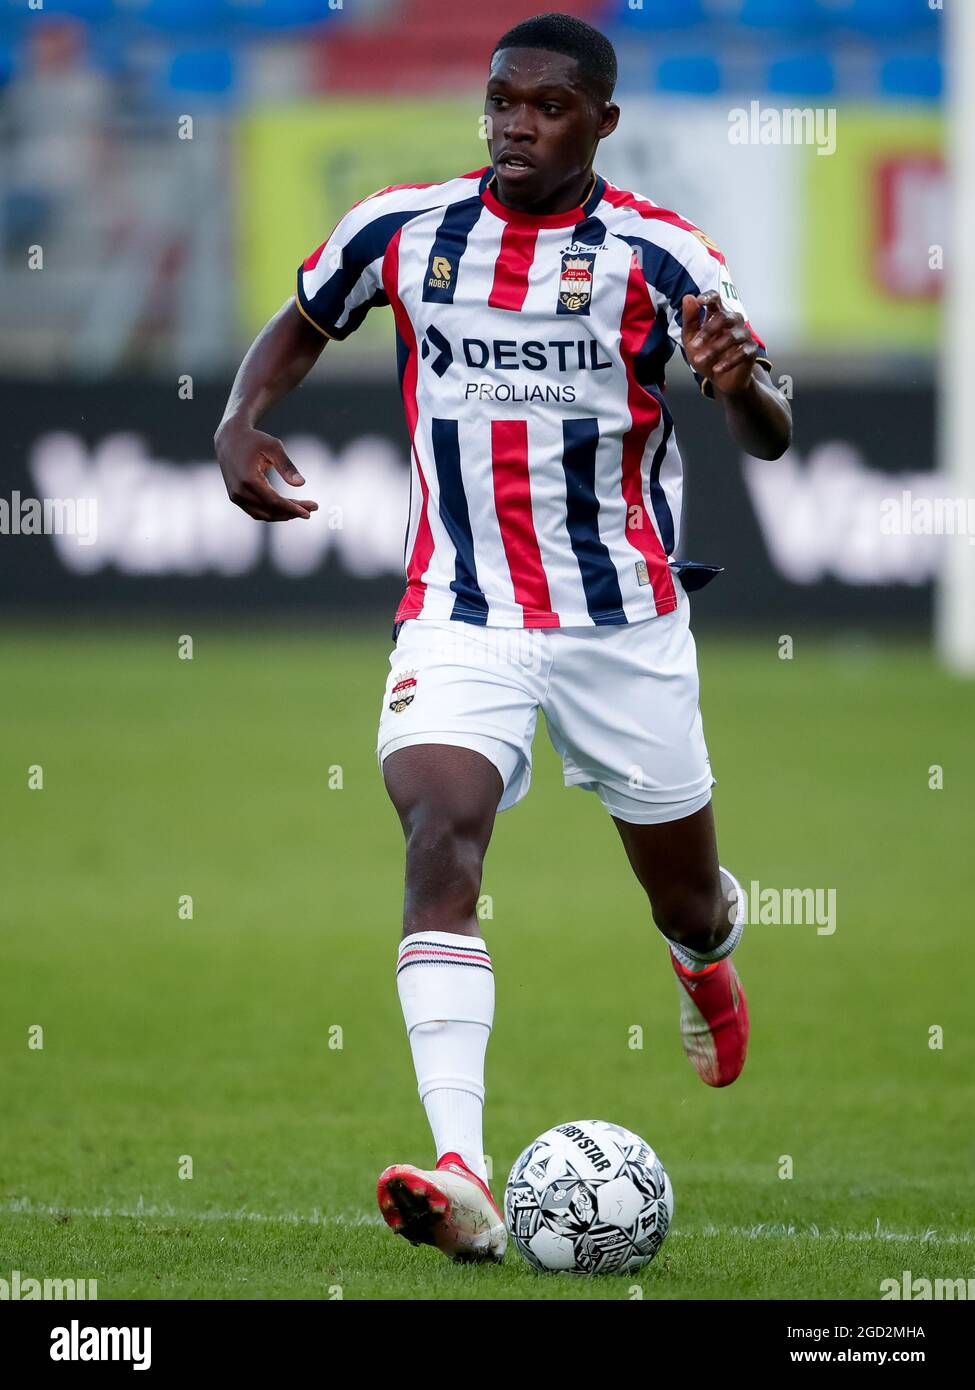 TILBURG, NETHERLANDS - AUGUST 10: Derrick Kohn of Willem II during the Pre-season Friendly match between Willem II and Royal Excelsior Virton at the Koning Willem II Stadion on August 10, 2021 in Tilburg, Netherlands (Photo by Broer van den Boom/Orange Pictures) Stock Photo